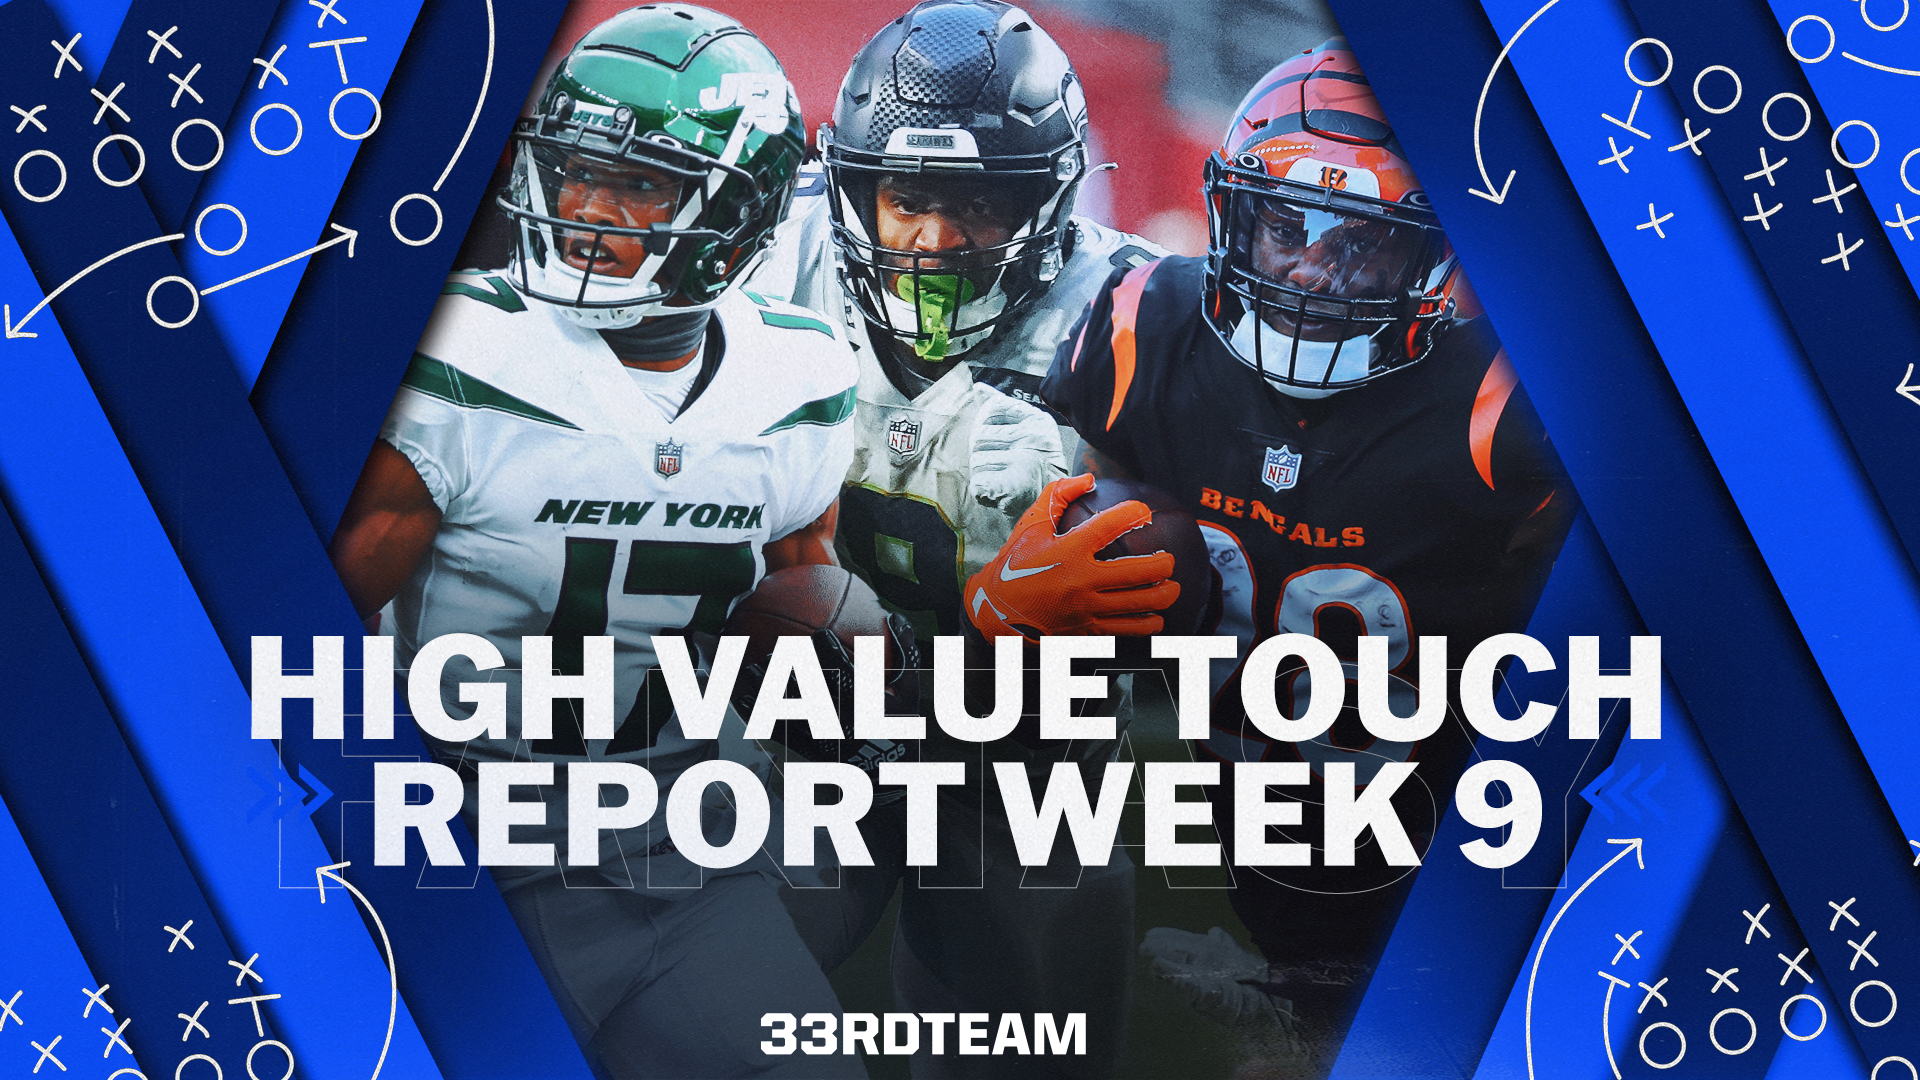 High-Value Touch Report: Week 9 Fantasy Football Rushing & Receiving Data